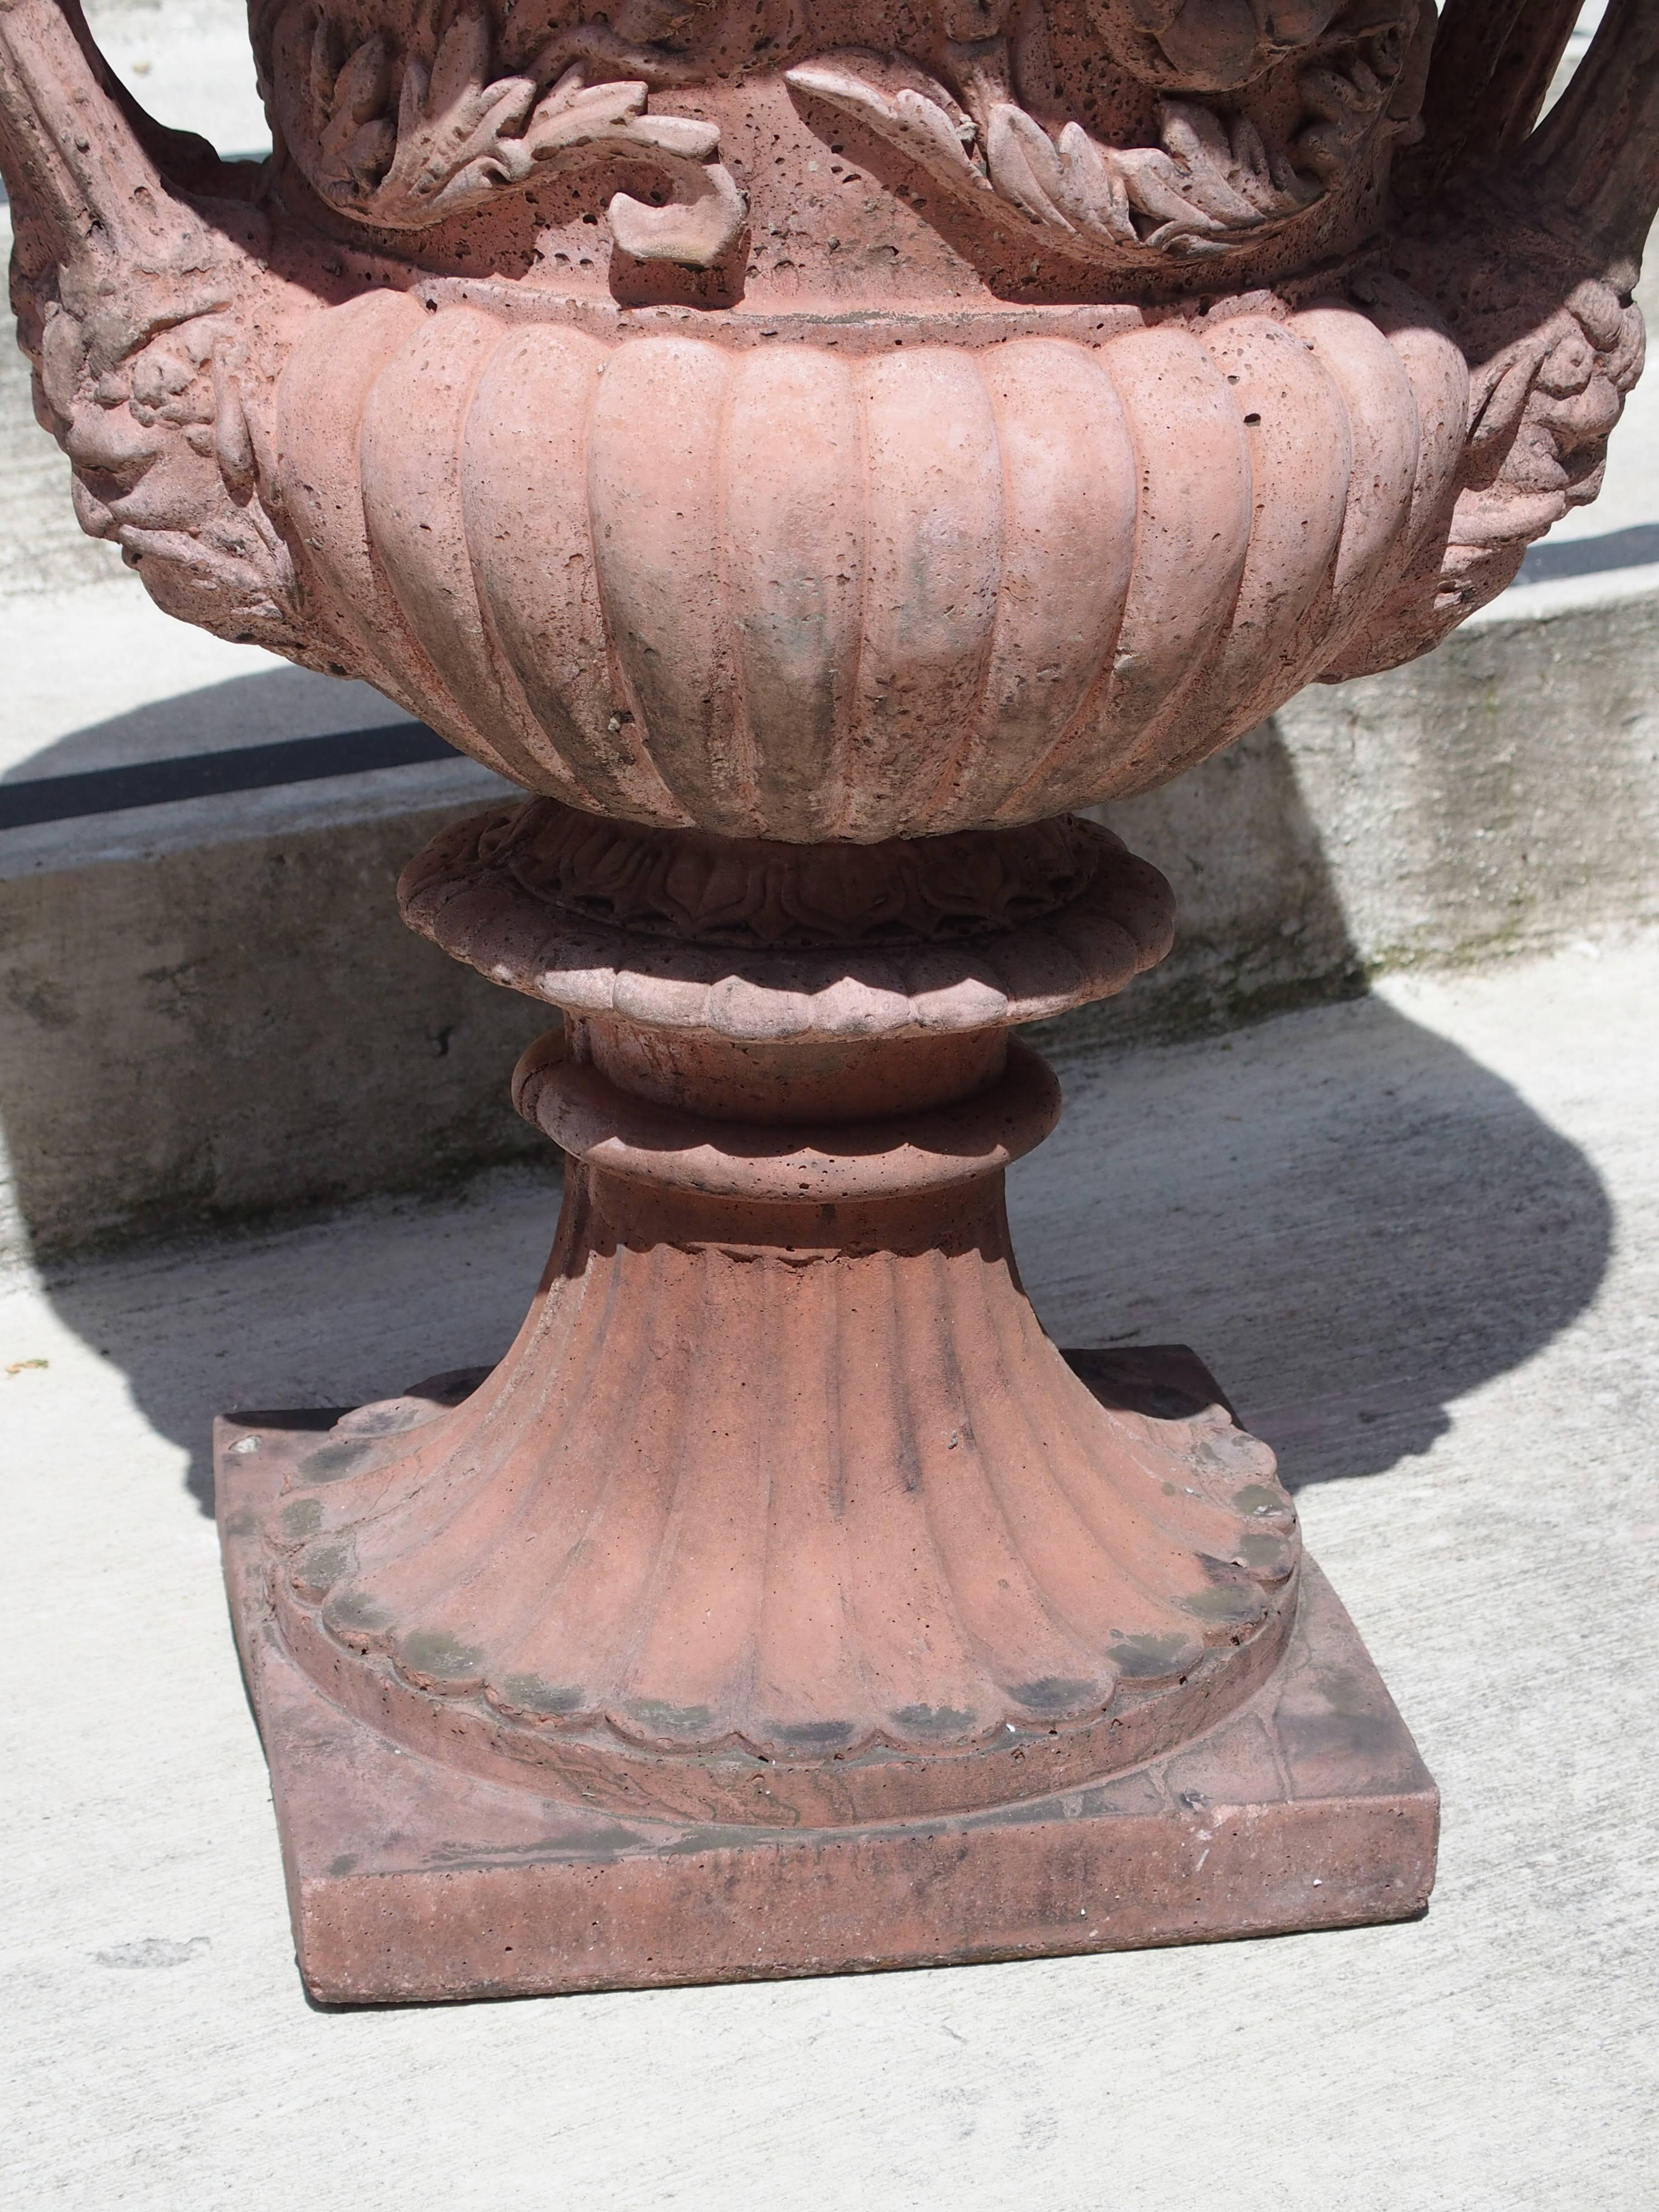 These cast stone urns have been made with a mixture of crushed limestone, bluestone, and cement. The terracotta color has been mixed in with the stone, not applied. Each urn has two handles with double mascarons. Gadrooned lobes are beneath, which